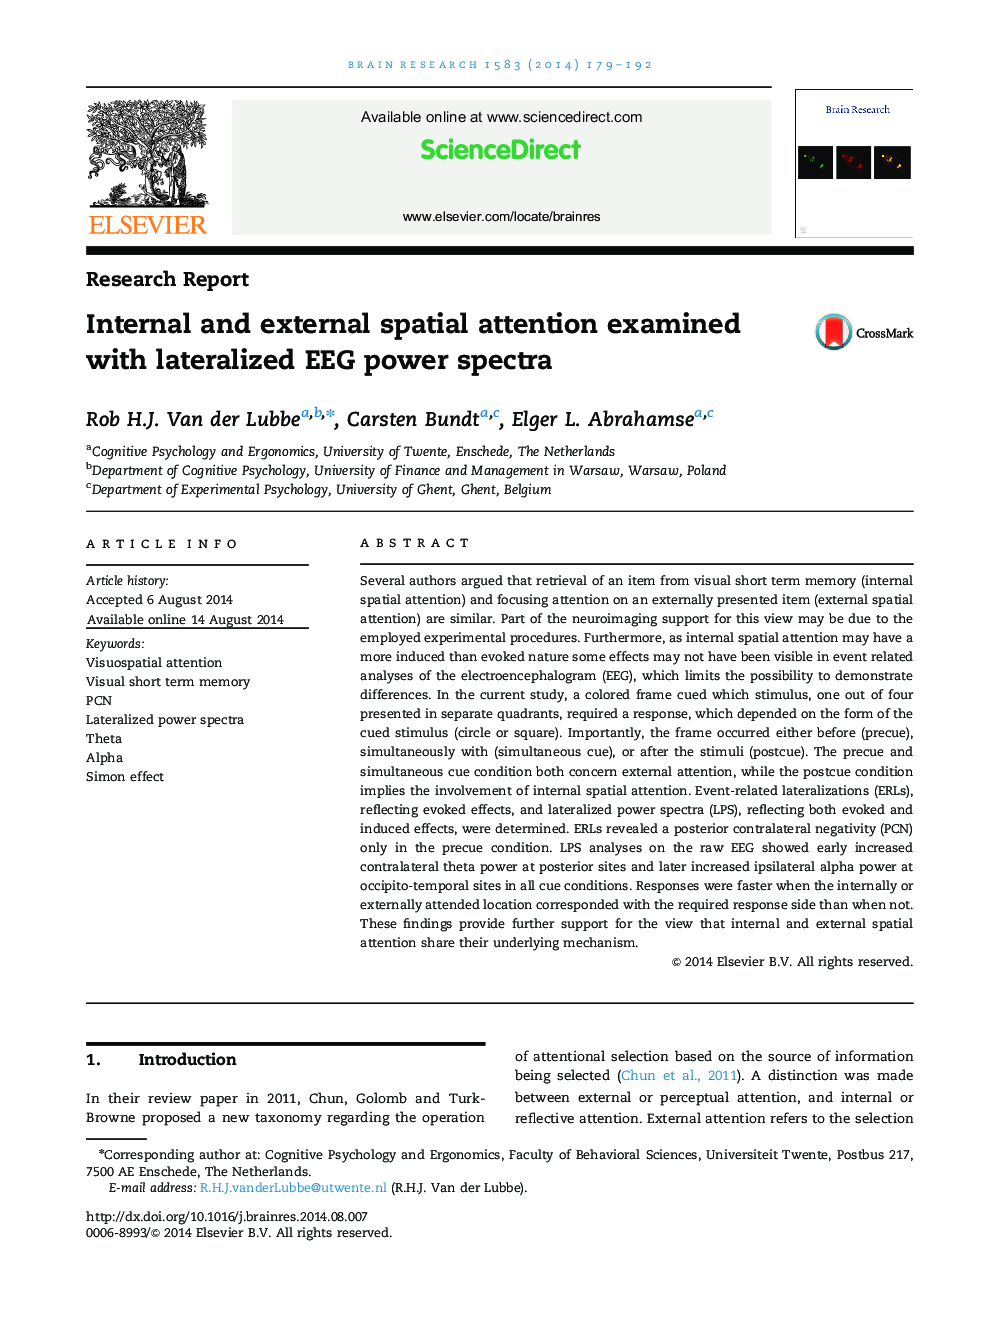 Internal and external spatial attention examined with lateralized EEG power spectra